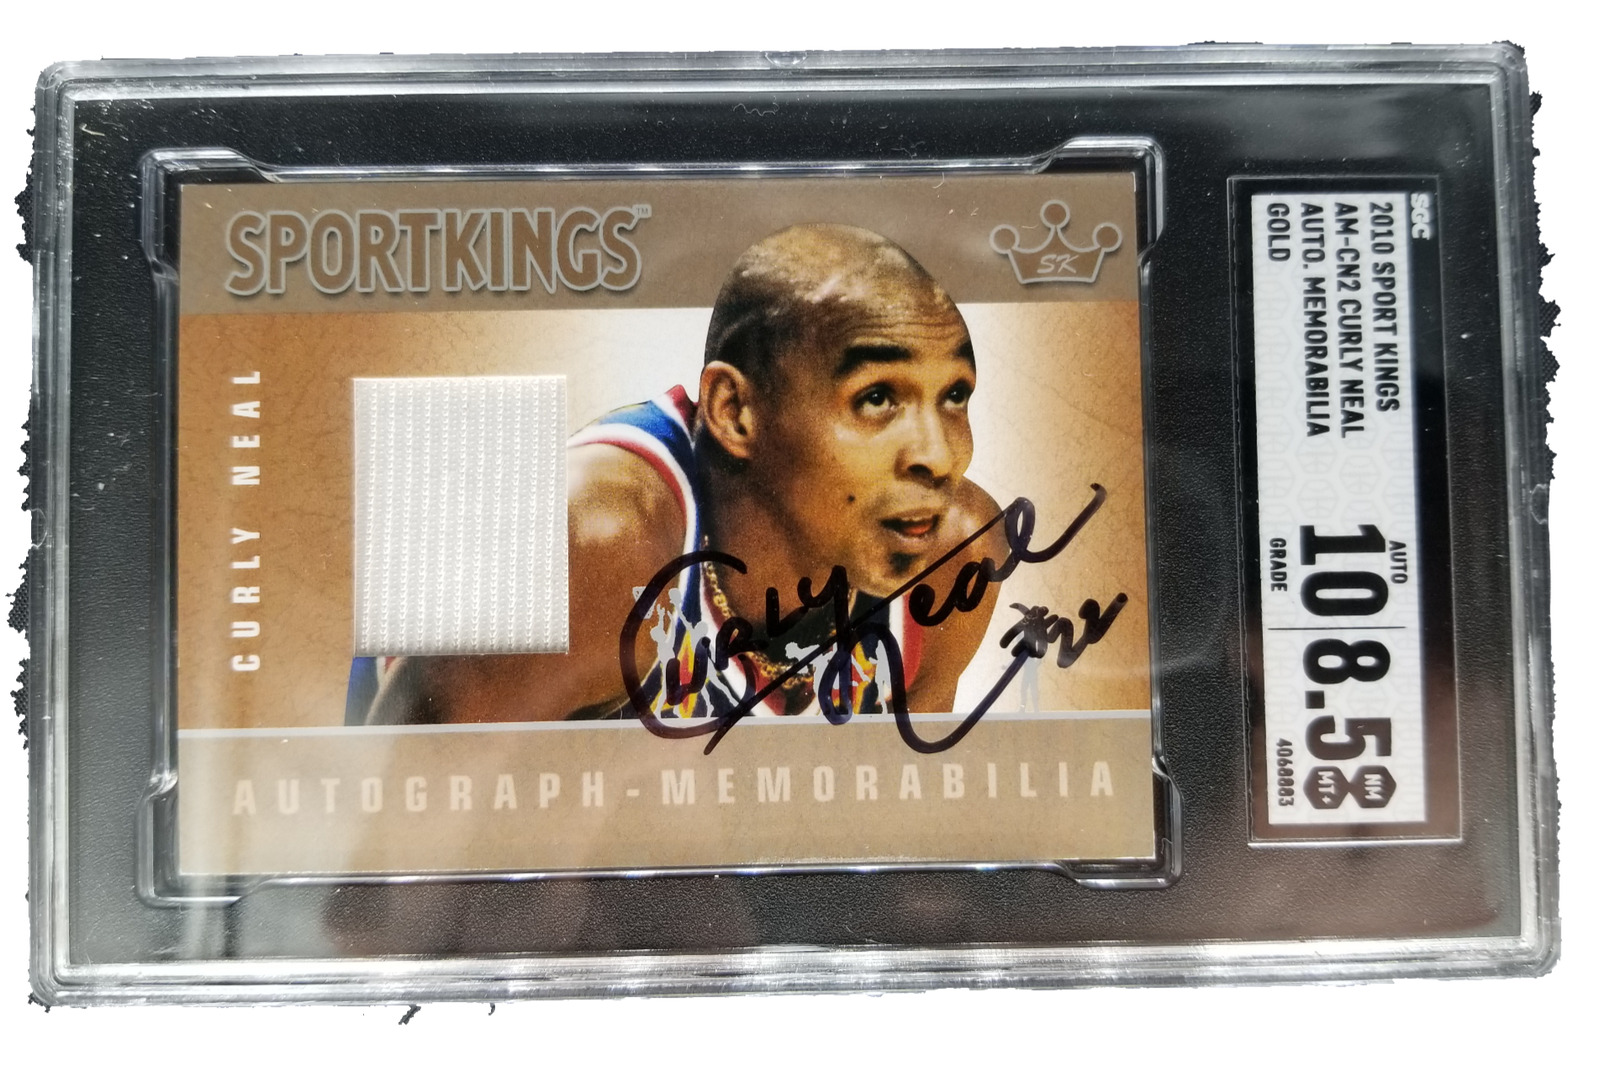 2010 Sport Kings Curly Neal Autographed Sport Kings Game Worn Patch Card SGC 8.5